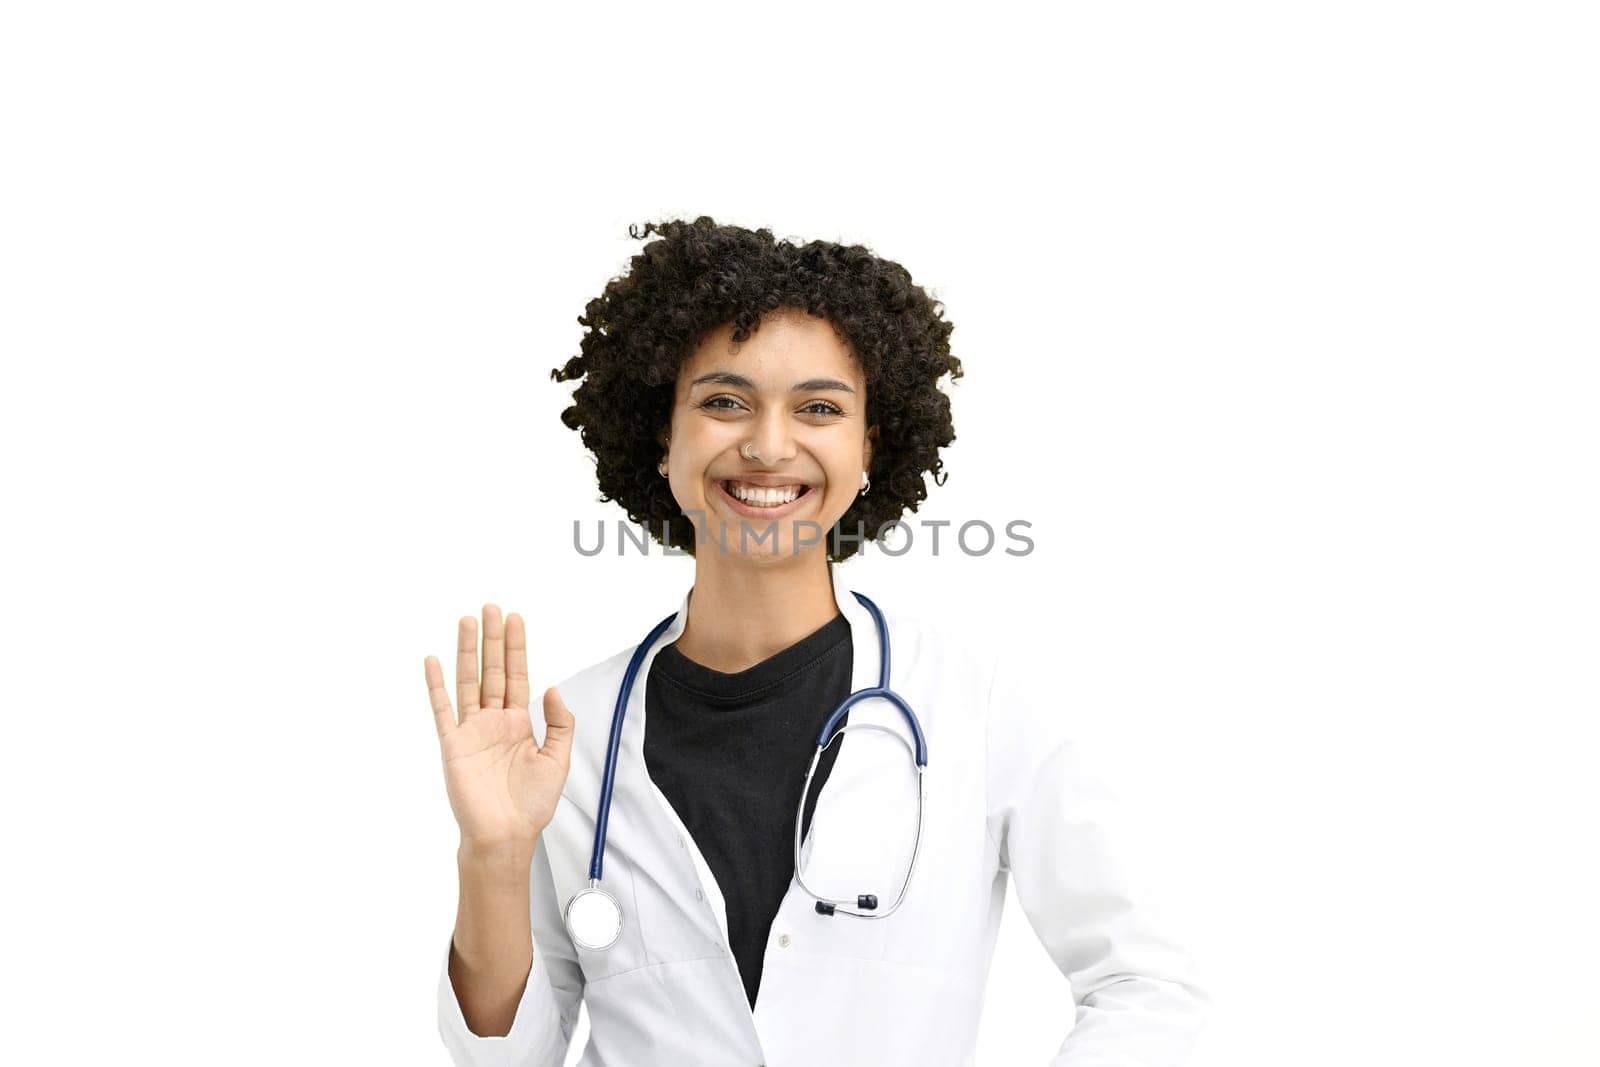 Female doctor, close-up, on a white background, waving her hand.